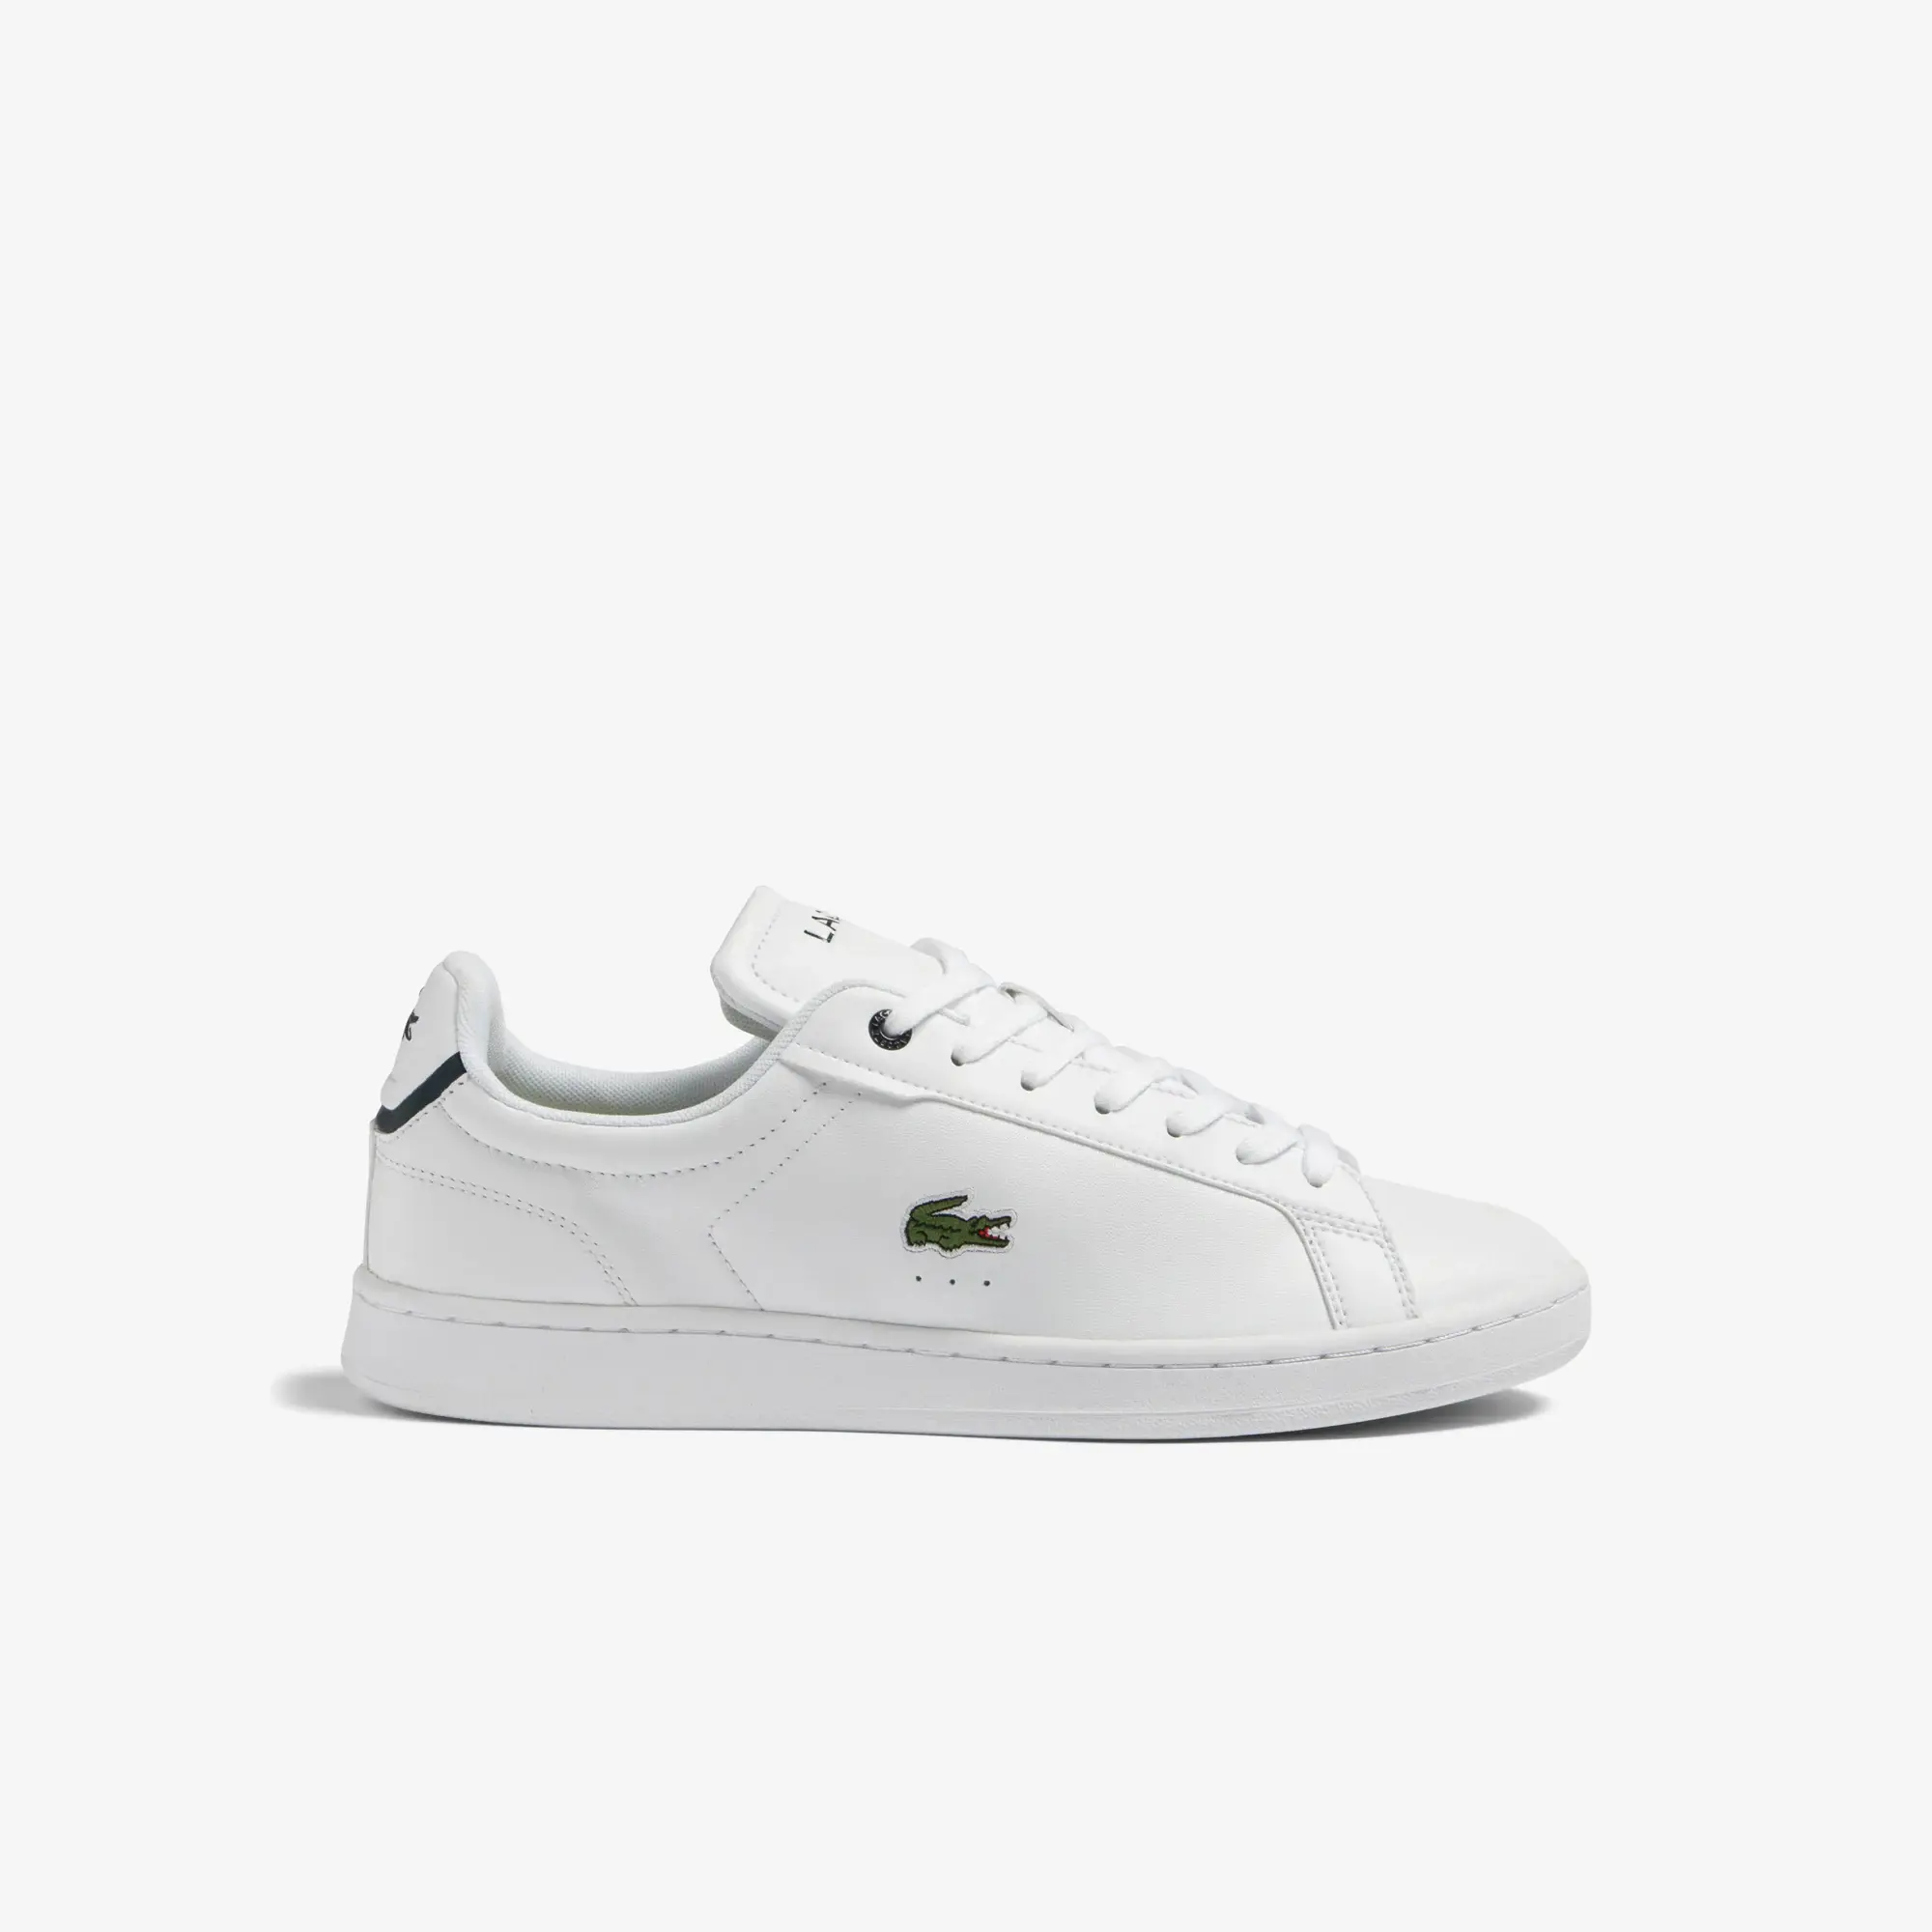 Lacoste Men's Carnaby Pro BL Leather Tonal Sneakers. 1